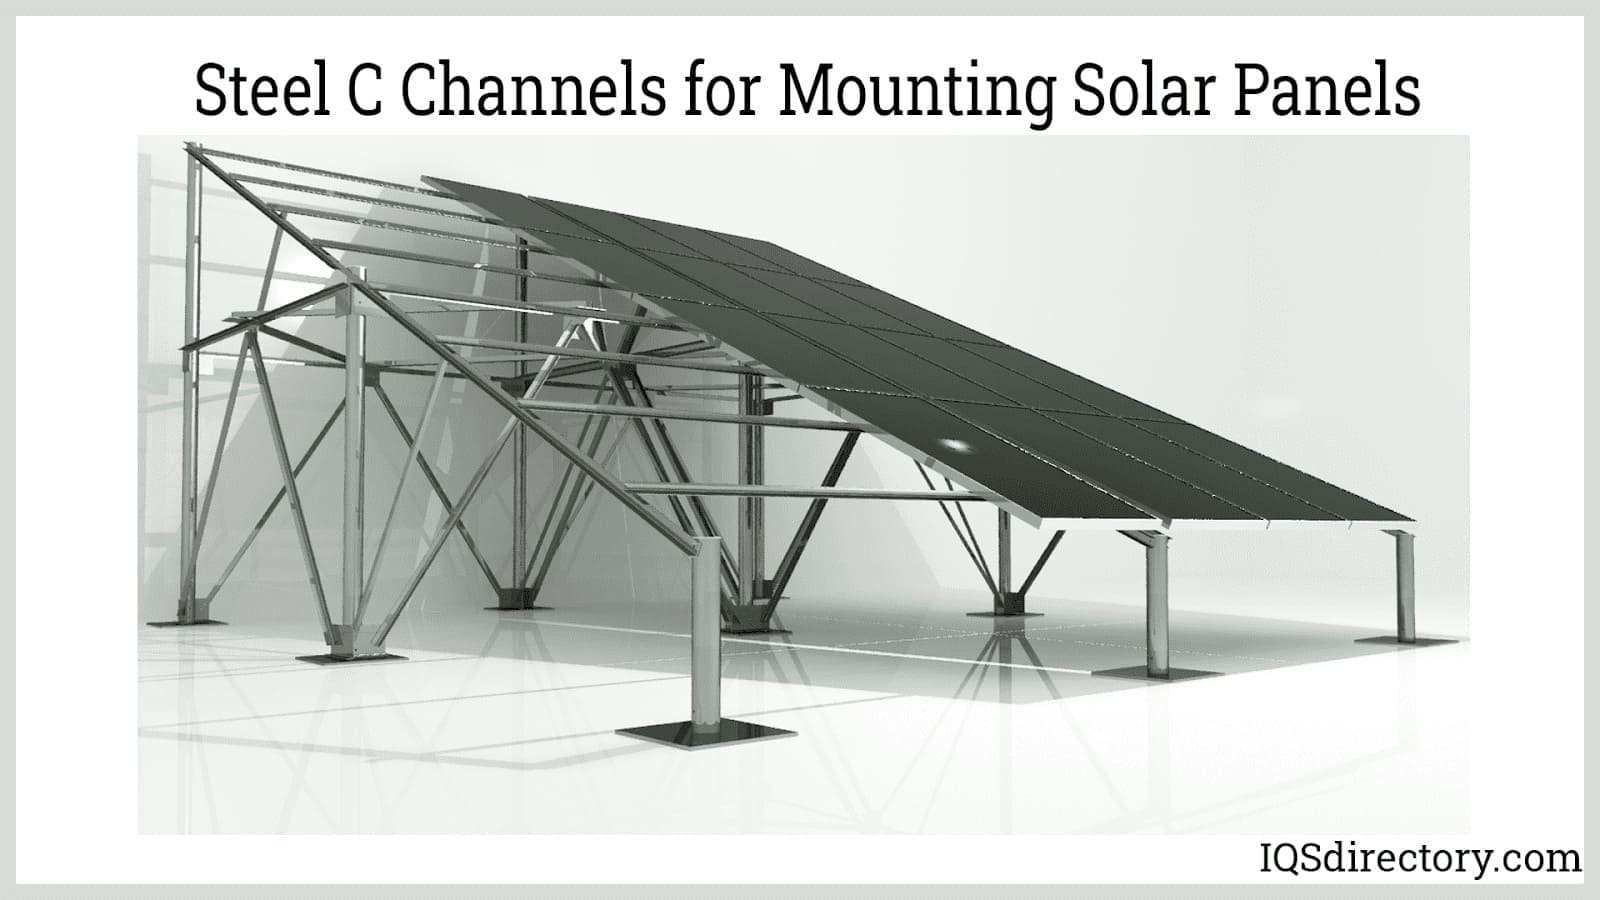 Steel C Channels for Mounting Solar Panels